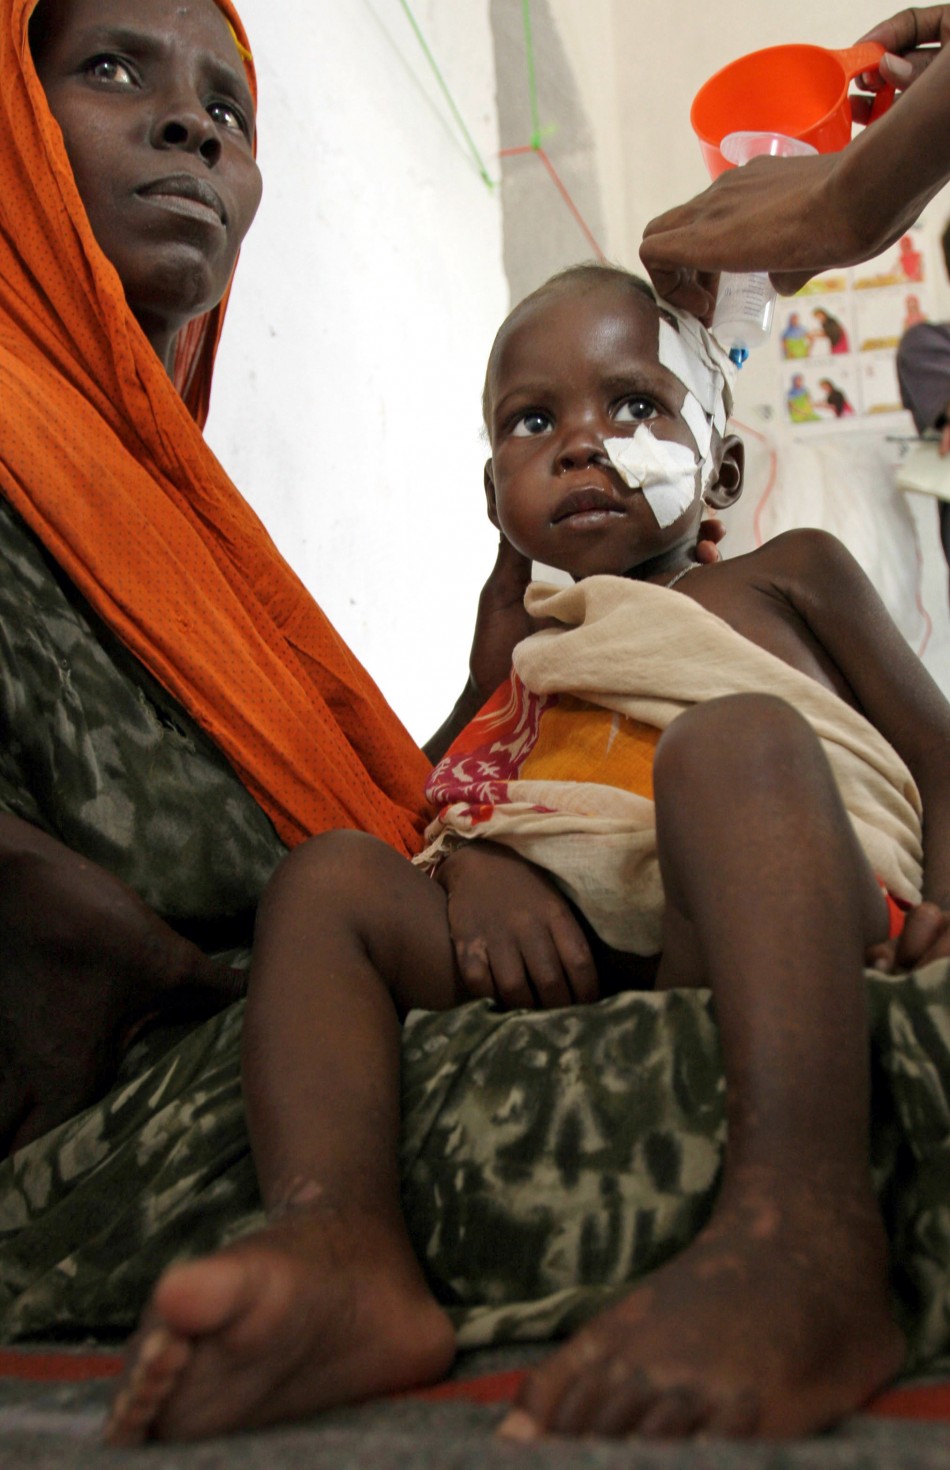 A malnourished child is fed using a naso-gastric tube at the therapeutic feeding centre run by Action contre la faim